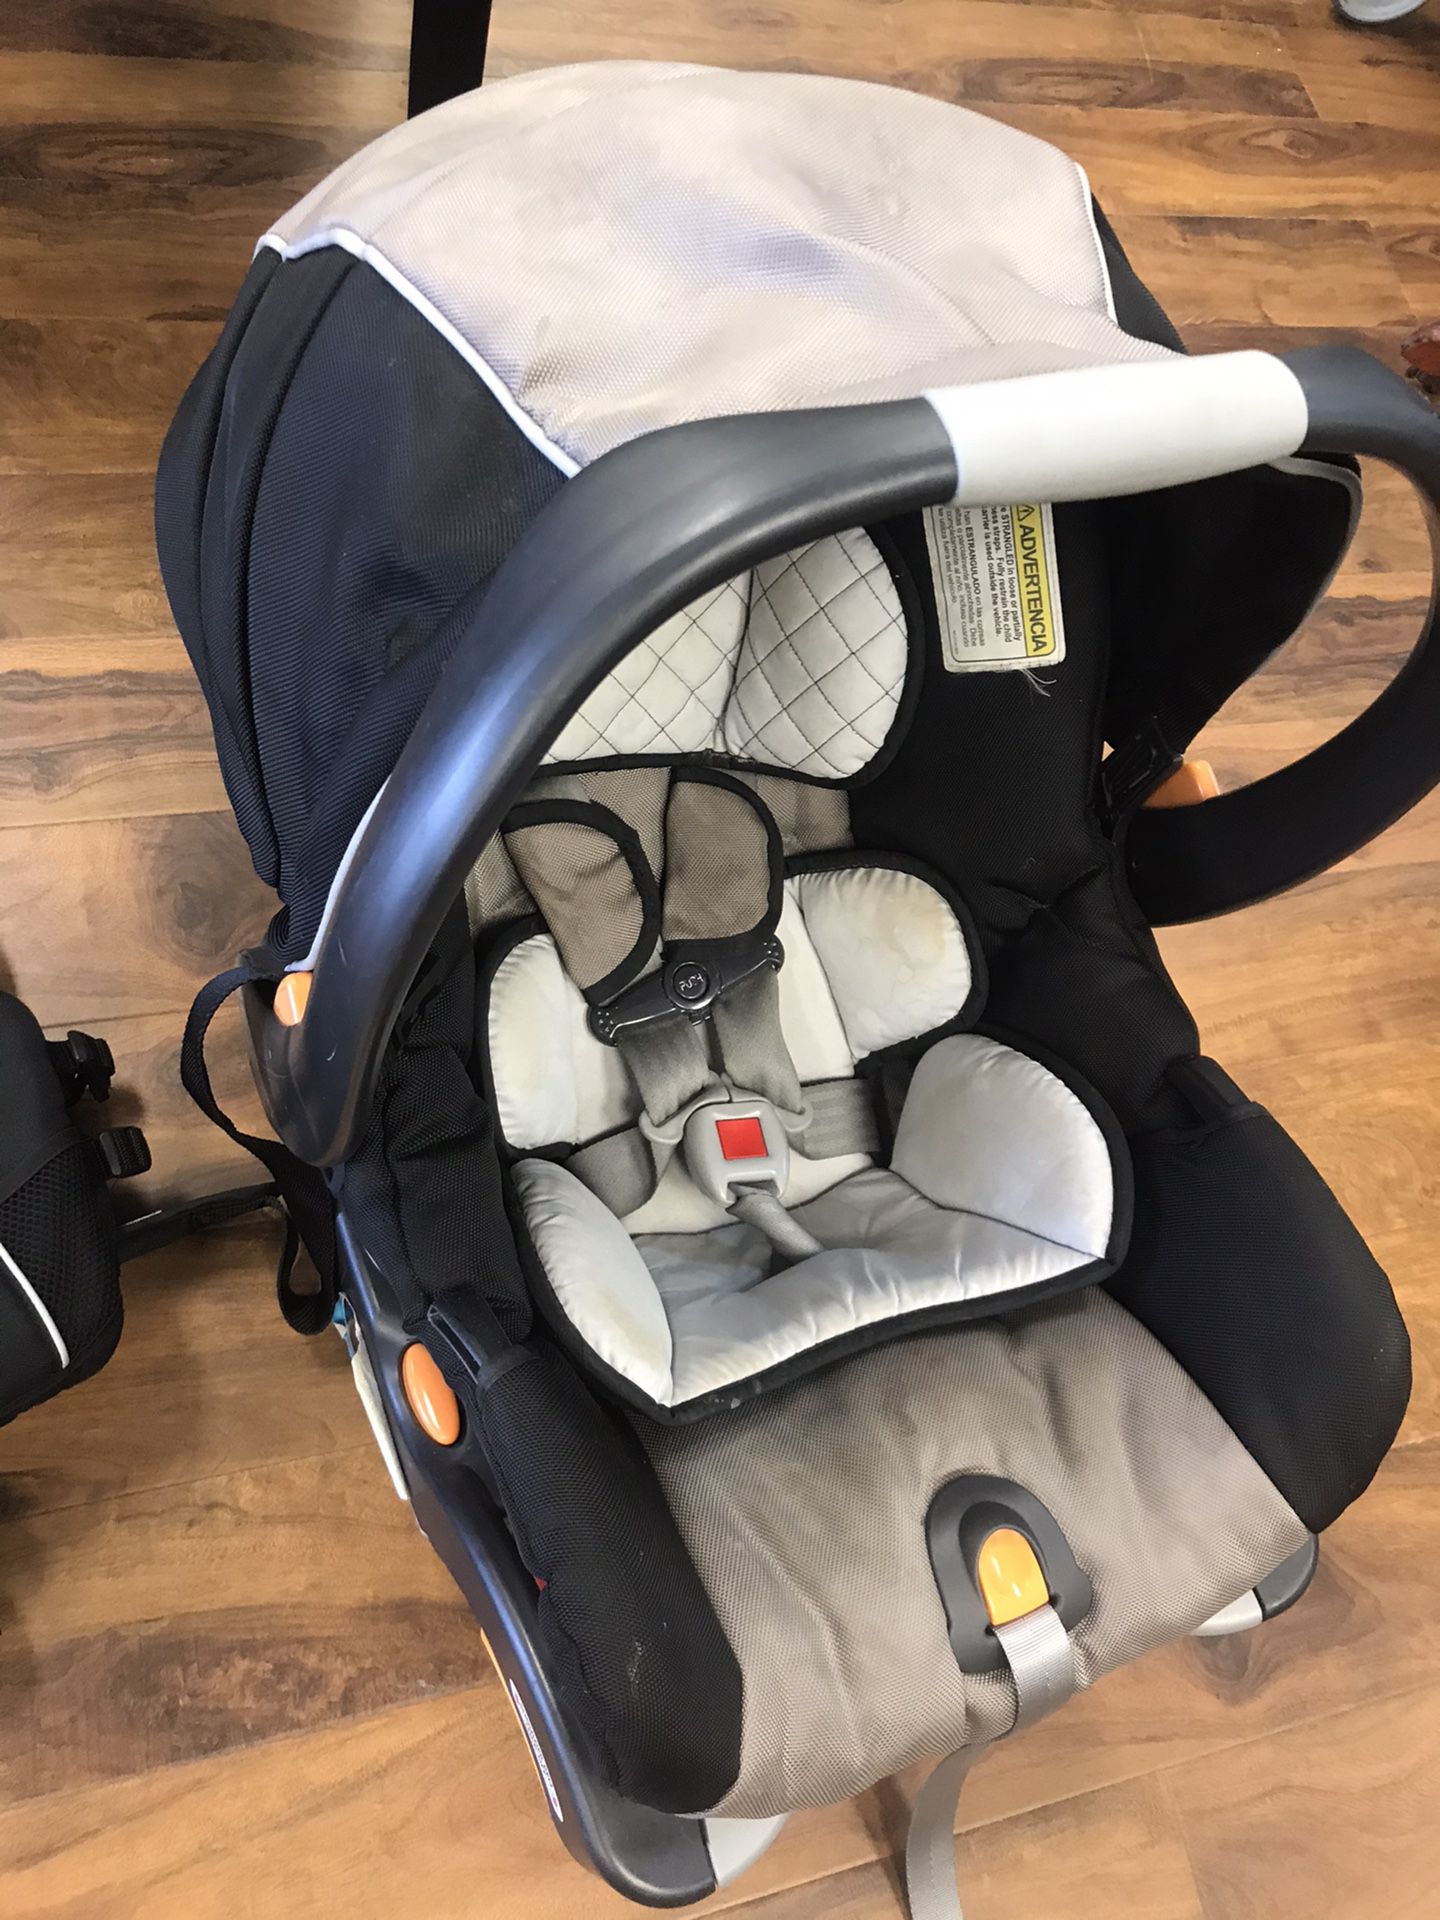 Chicco key fit 30 car seat! Practically New!!